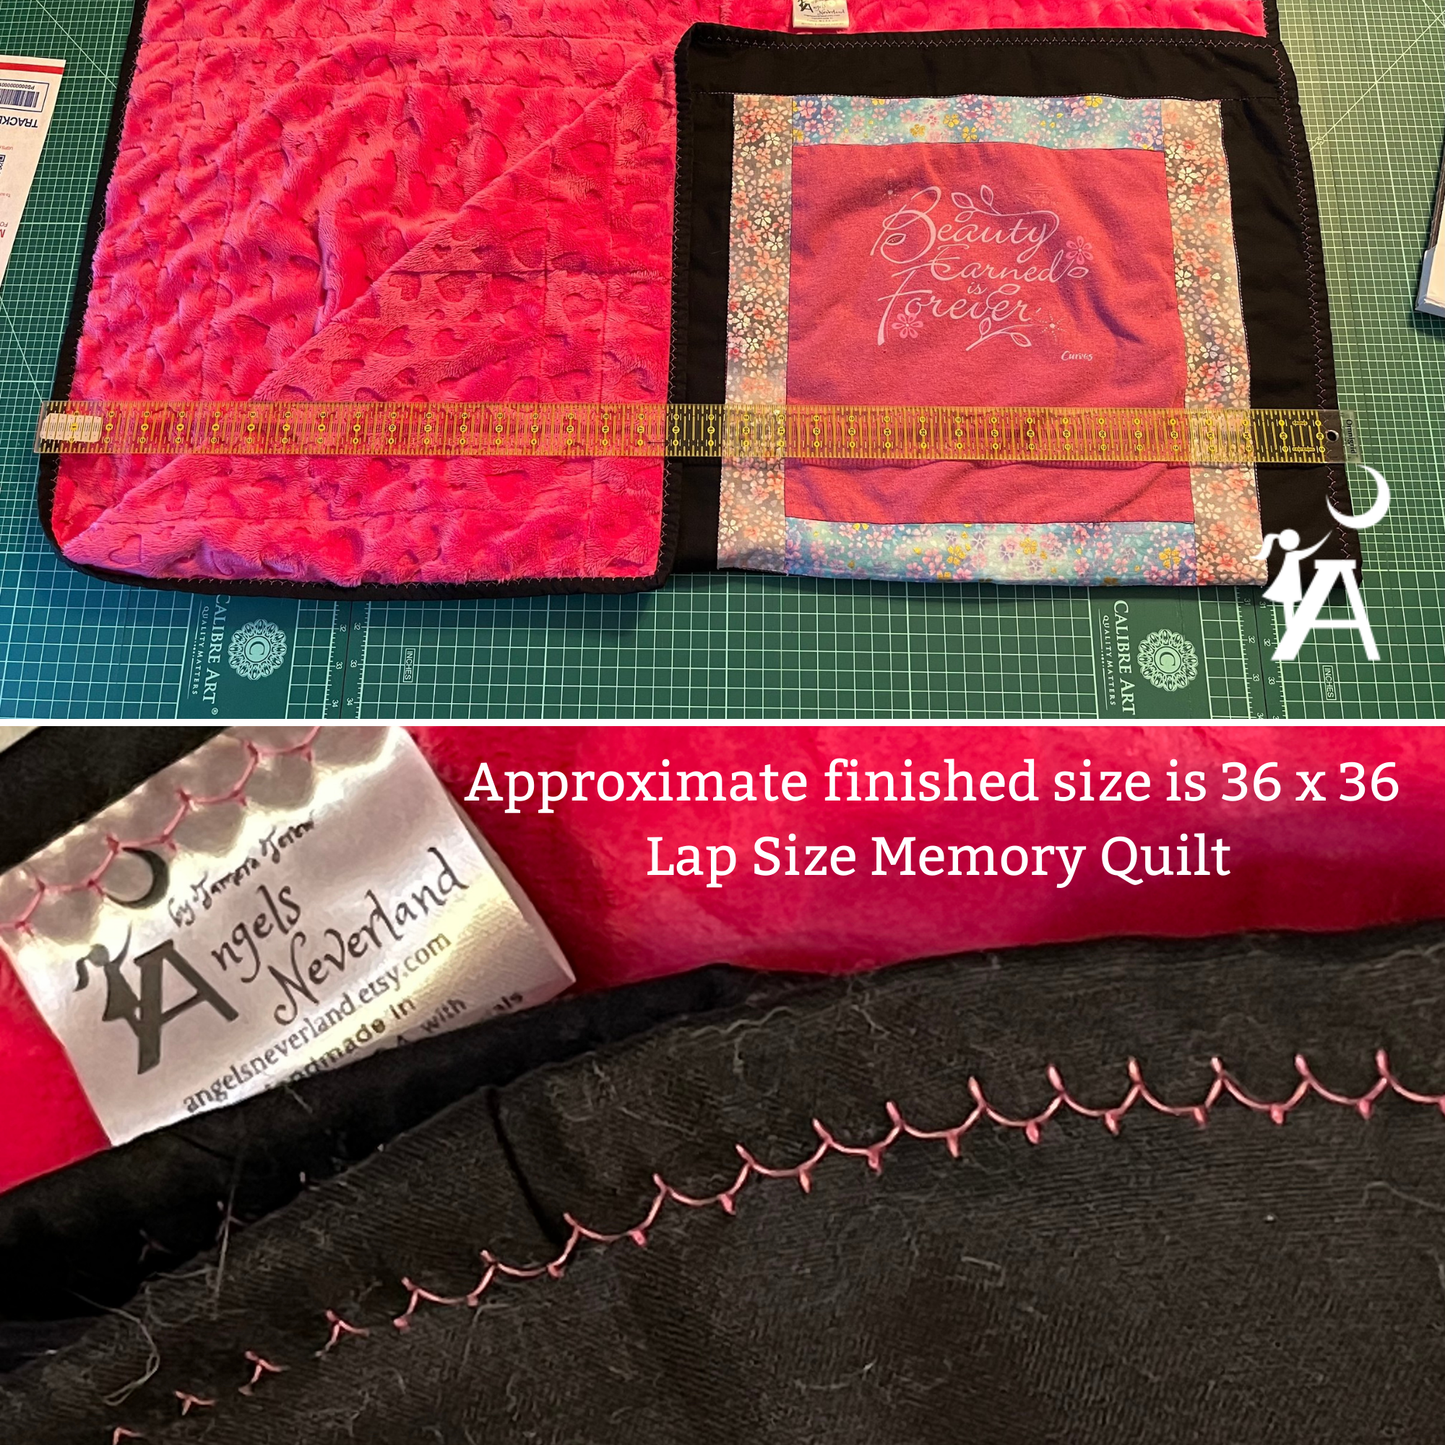 Angels Neverland Quilts & Comforters Custom T-shirt Memory Quilt lap size with 4 T-shirts, Heirloom T-shirt Quilt, Bereavement gift, memory blanket